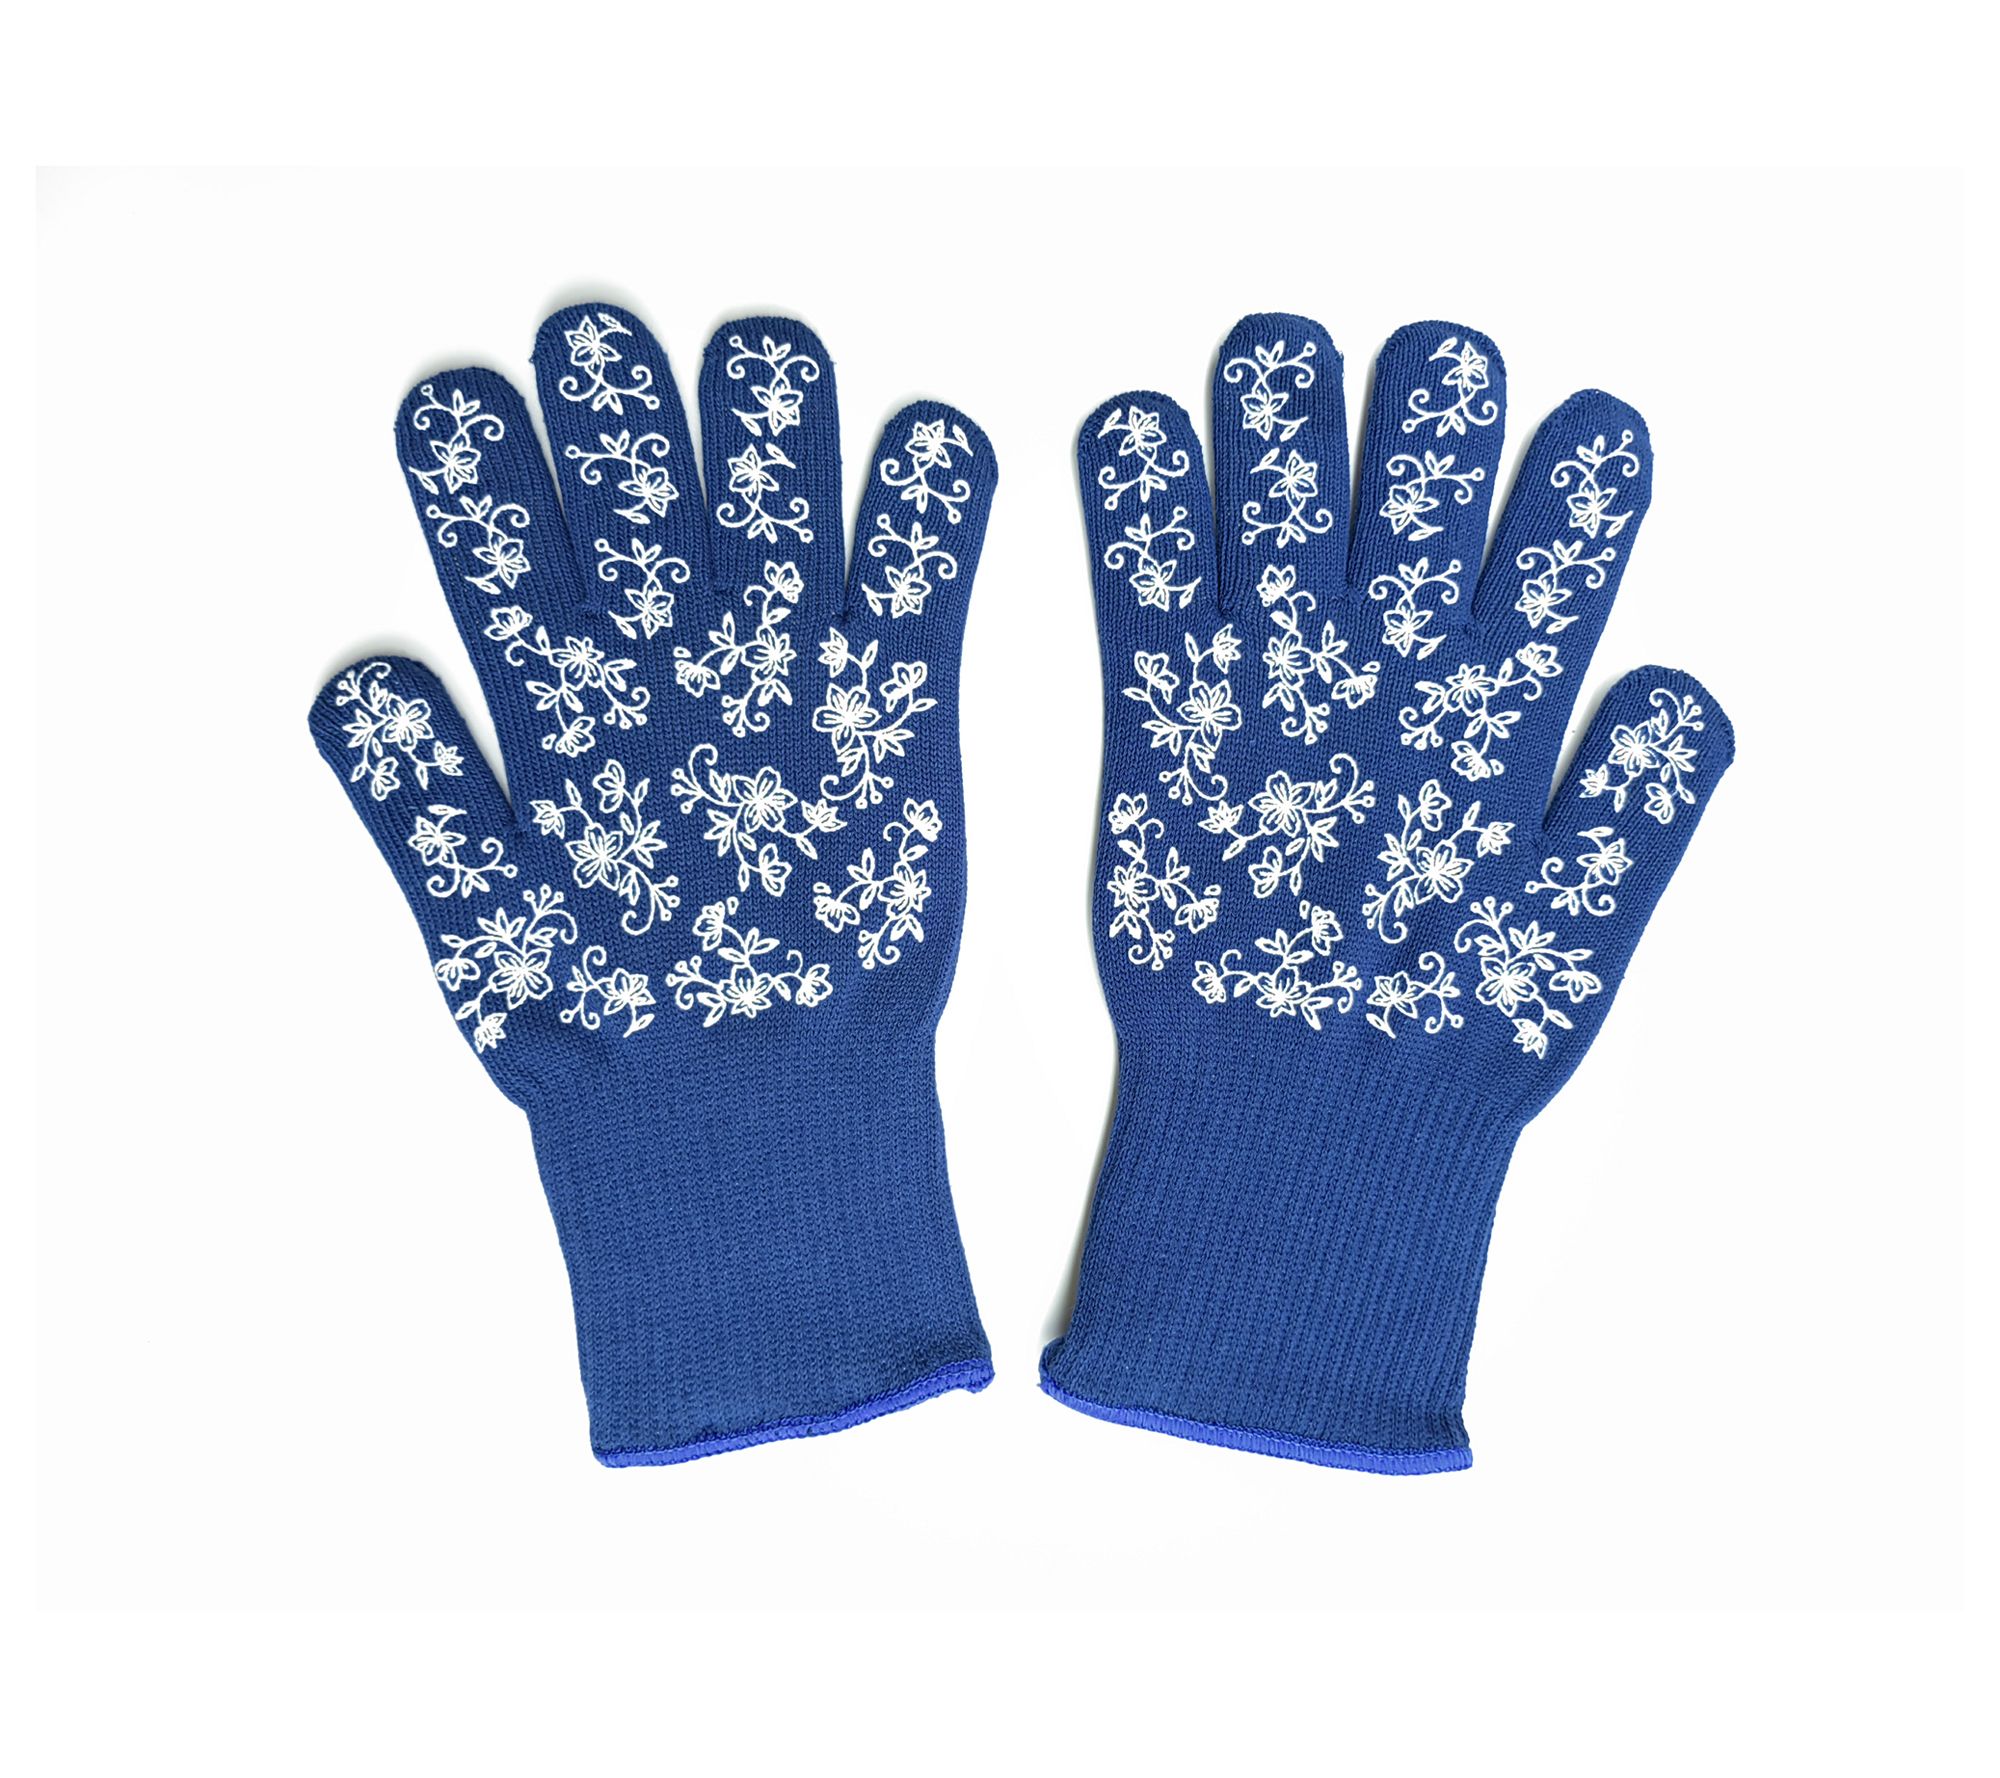 Blue- Silicone Oven Mitt, Heat Resistant Pot Holders, Flexible Oven Gloves, 1 Pair Heart Pattern